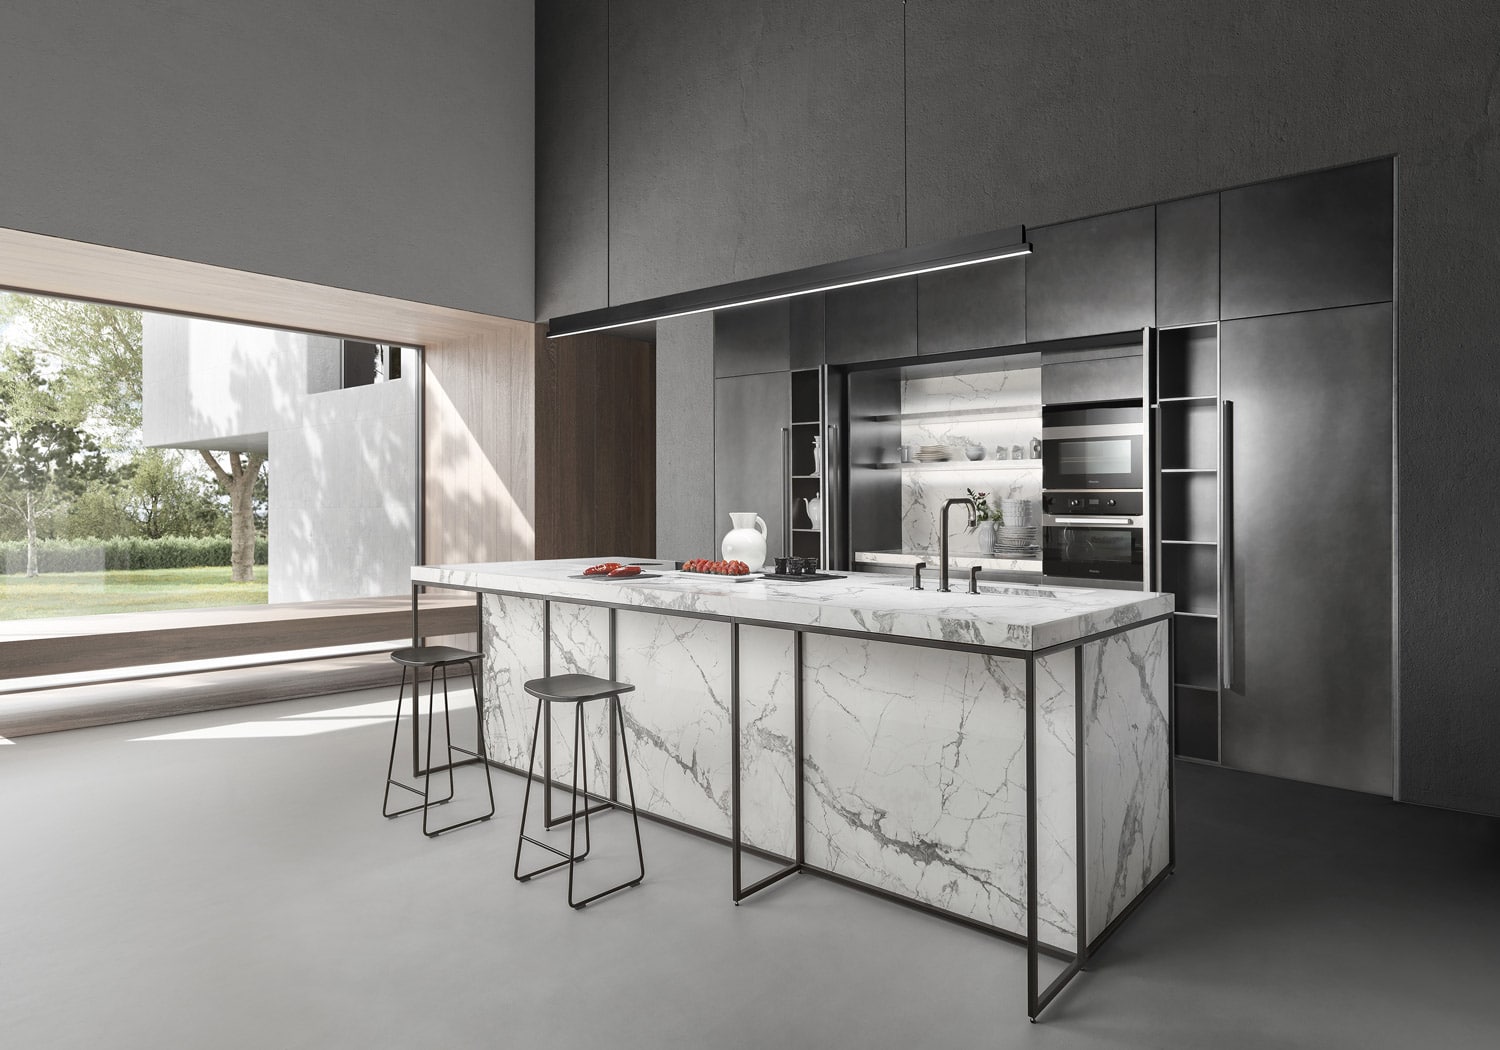 The central section of the tall units opens through a combination of single and bifolding pocket doors. The single pocket door reveals the appliances unit. The bifolding pocket doors disappear inside the cabinet to the left, revealing the niche made in Invisible White stoneware. 